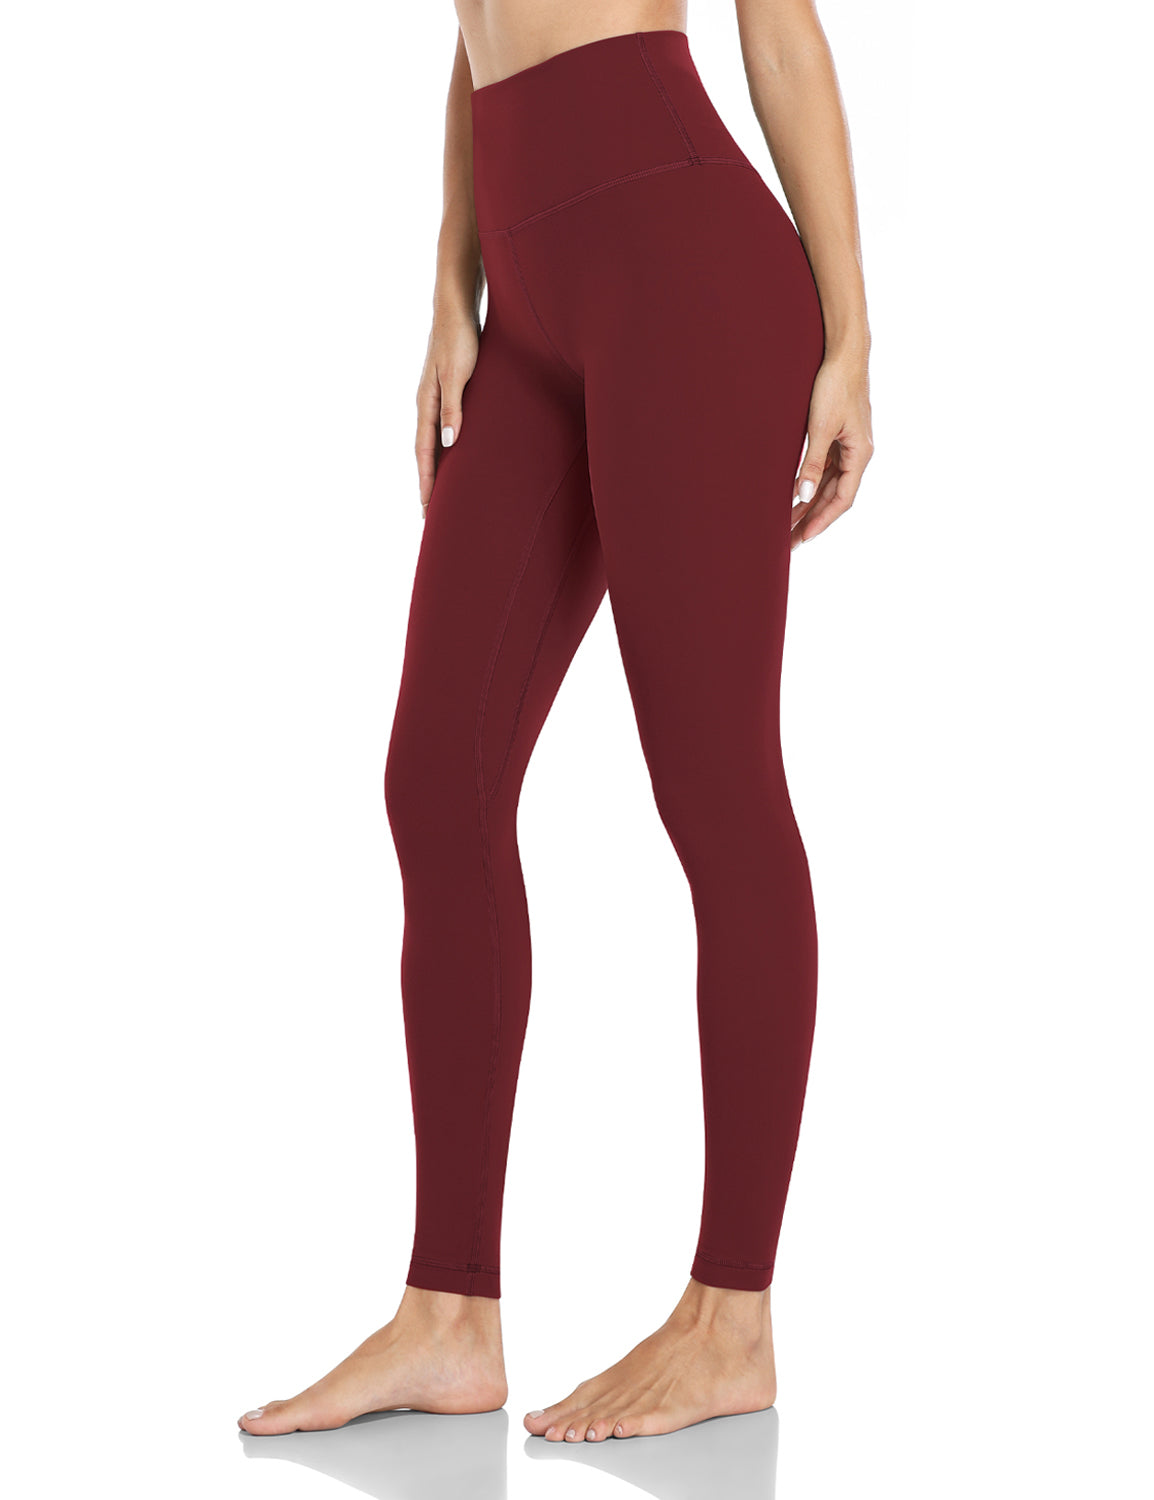  HeyNuts Essential High Waisted Yoga Leggings For Tall Women, Buttery  Soft Full Length Workout Pants 28 Java Coffee XS